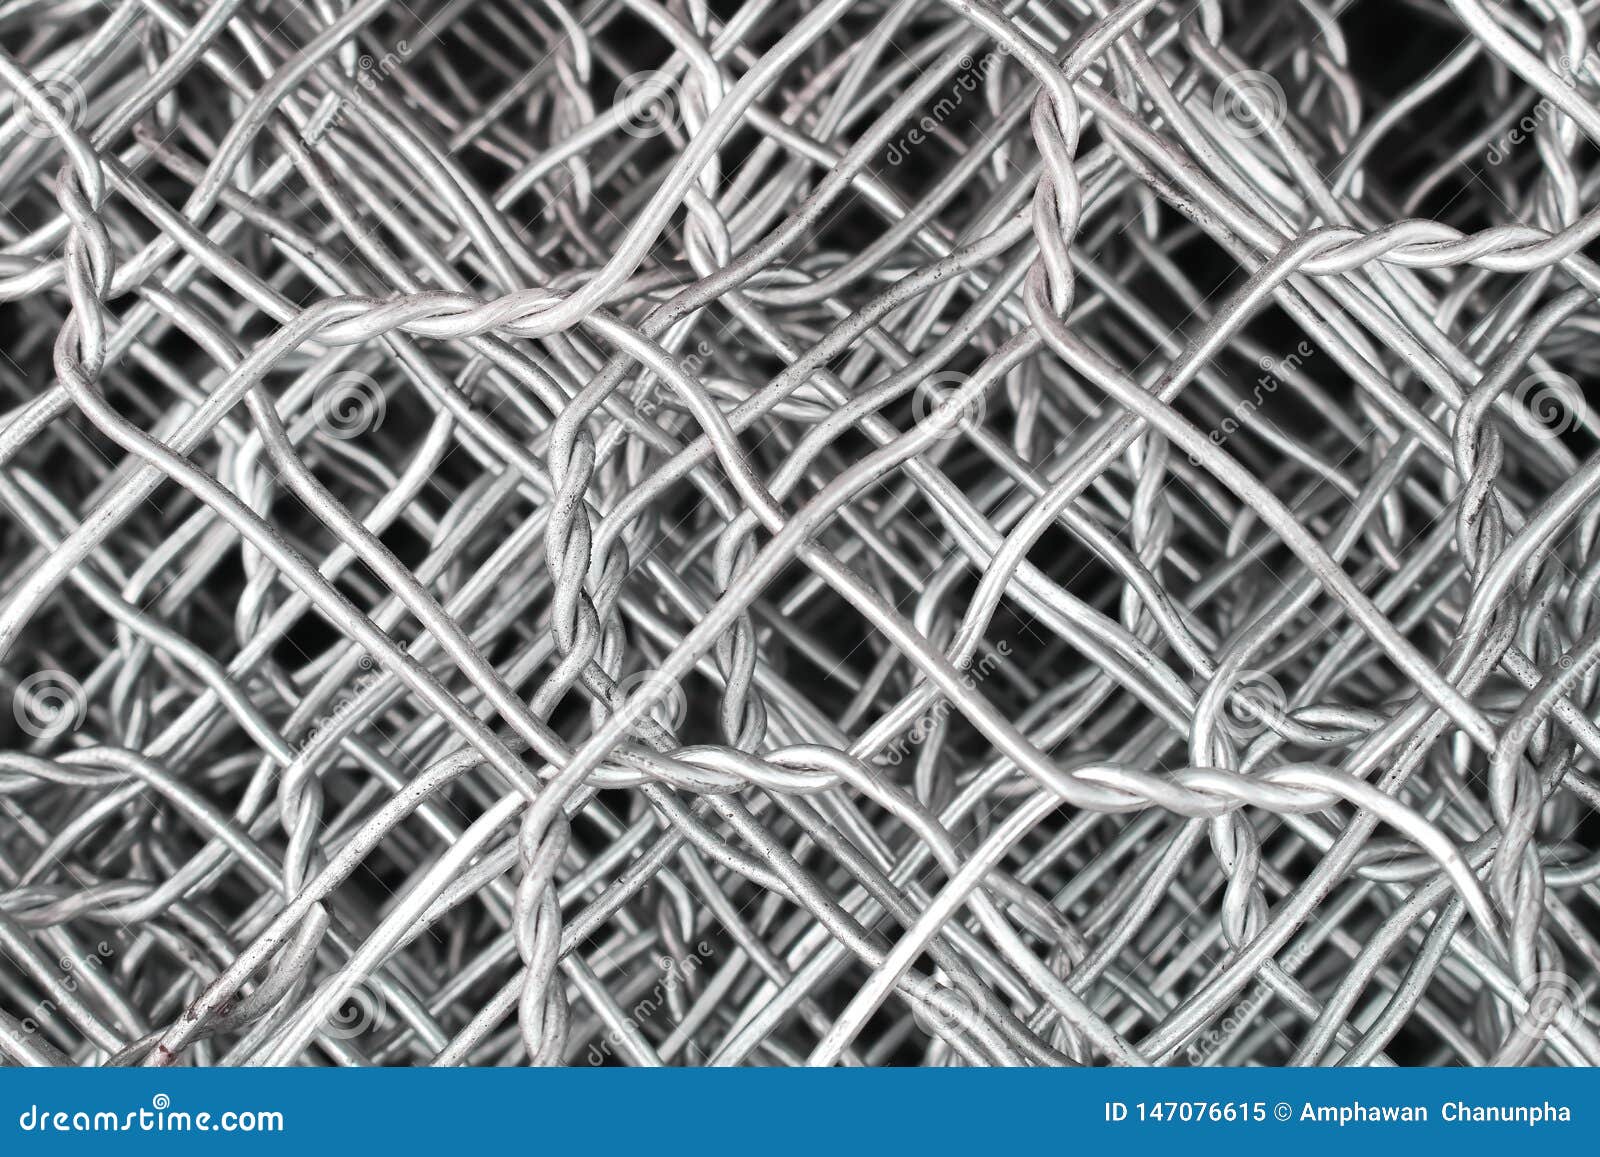 Close Up Stacks Of Steel Net Patterns Texture Background For Build ...
